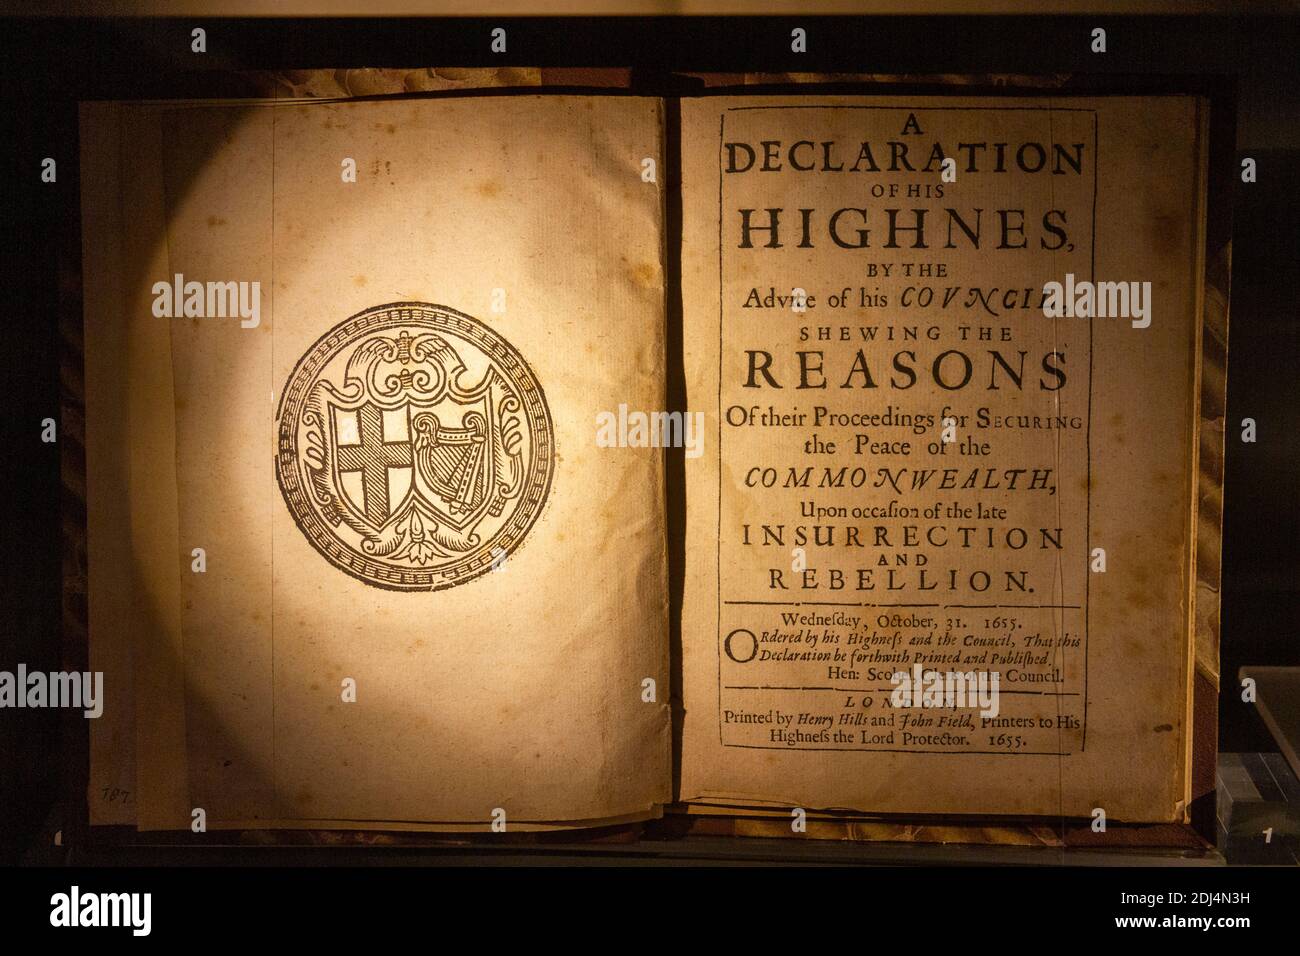 A Declaration of His Highness by the Advice of his Council in the National Civil War Centre, Newark Museum, Newark-on-Trent, Notts, UK. Stock Photo